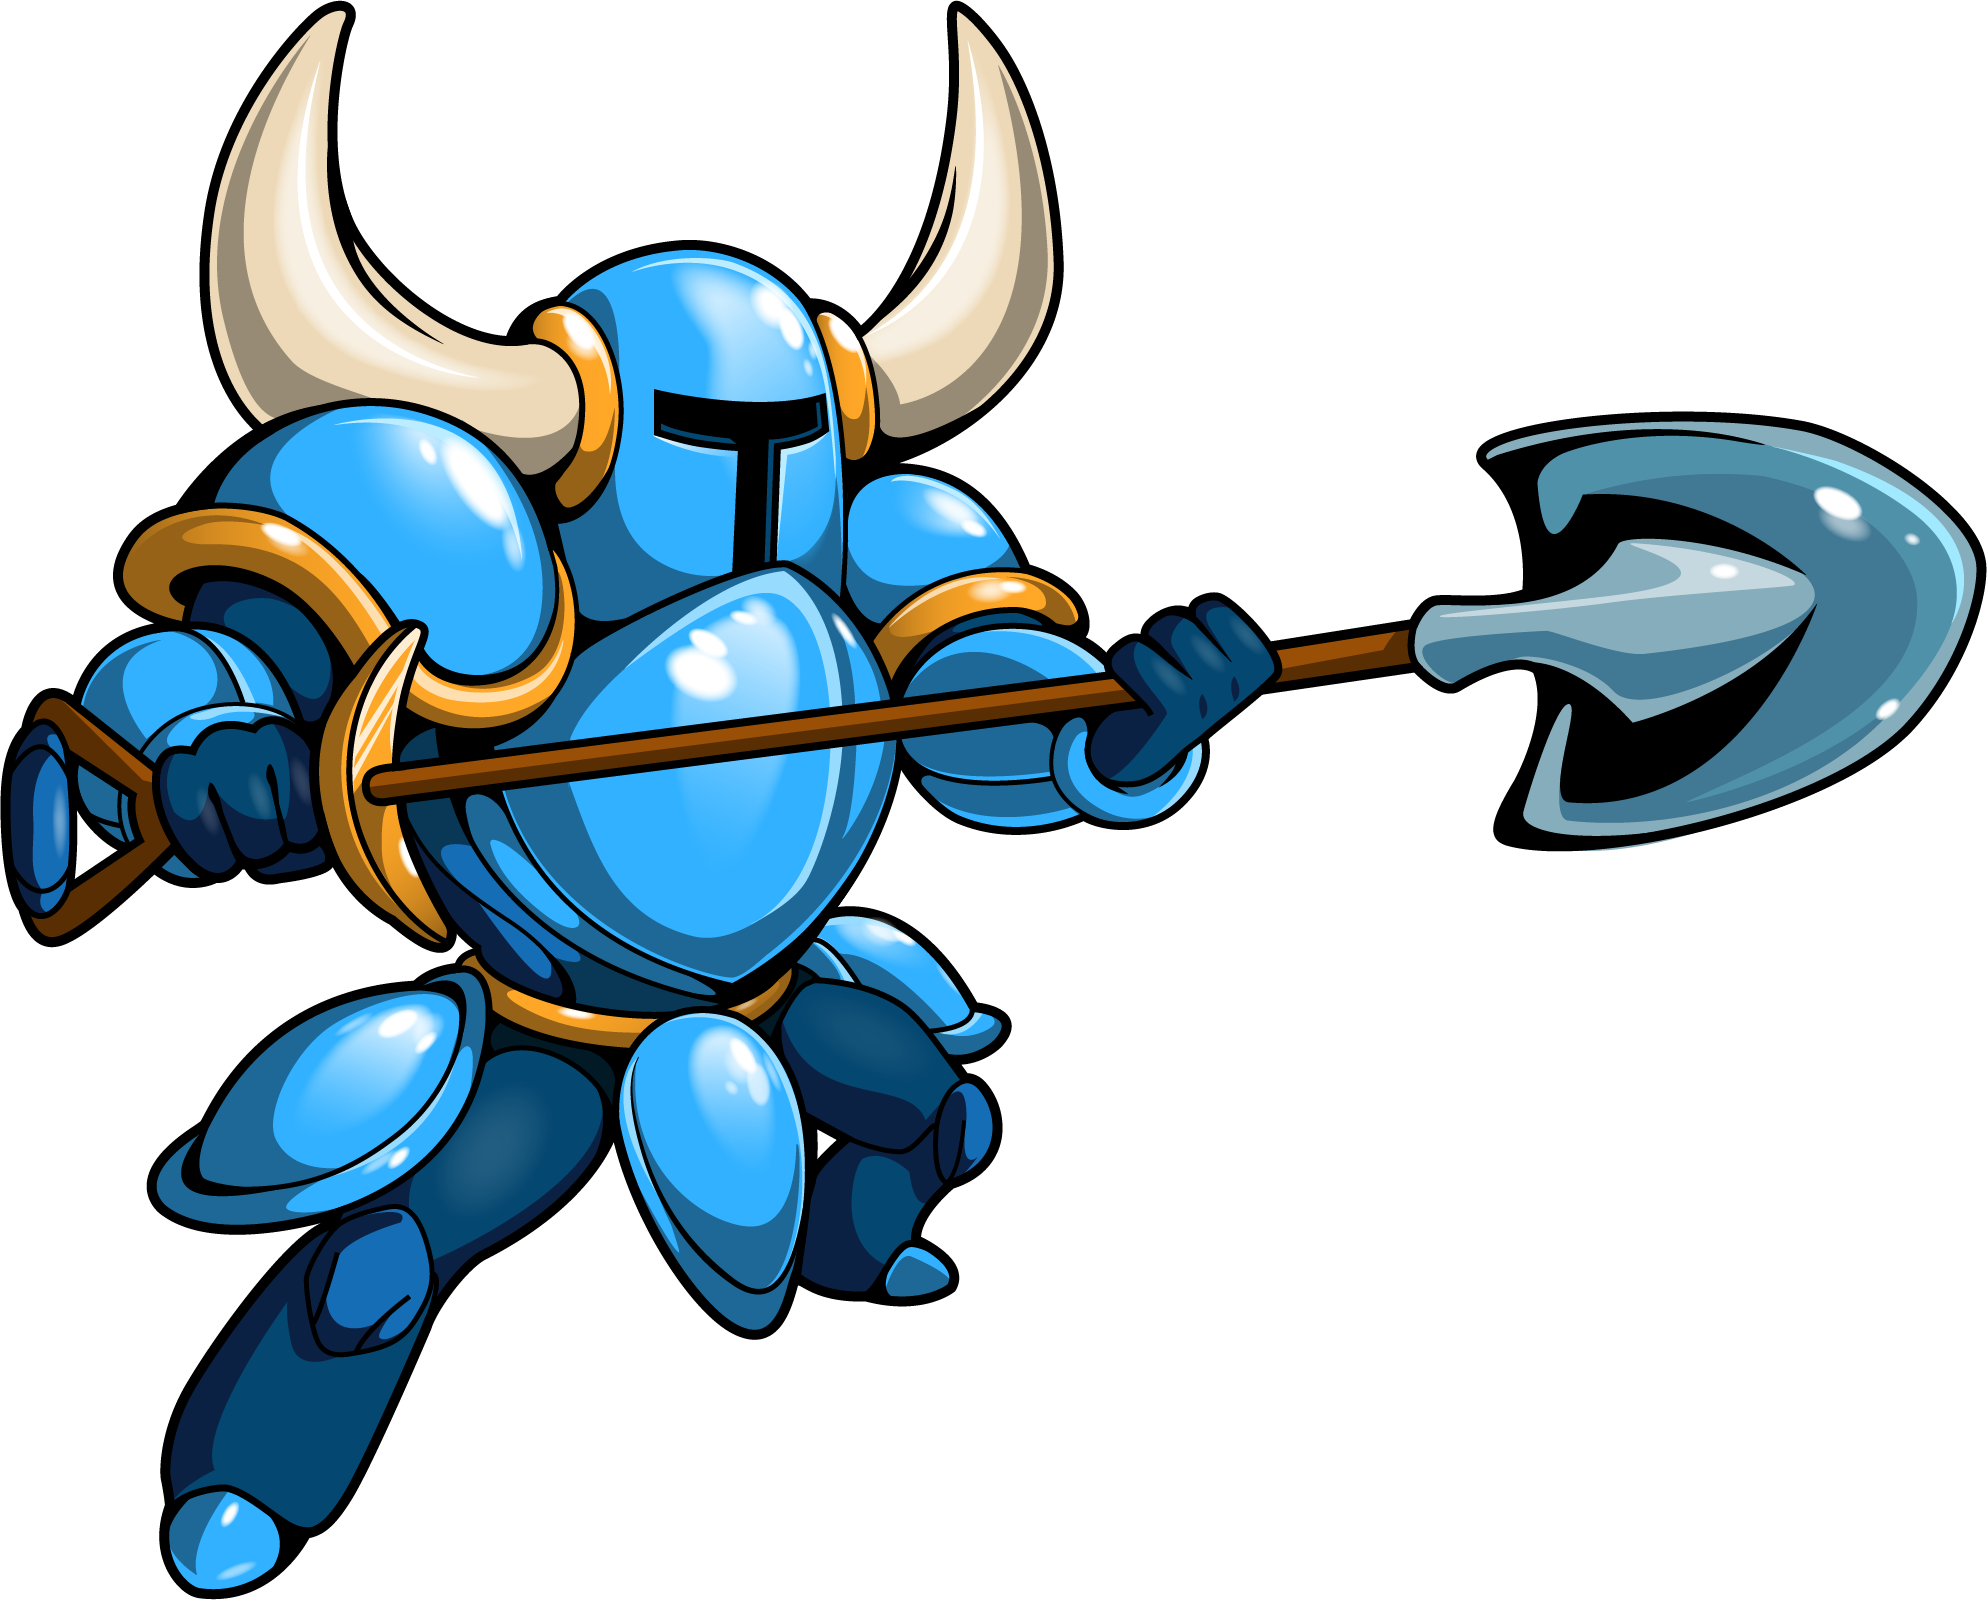 Shovel Knight Game Wallpaper In High Resolution At Games